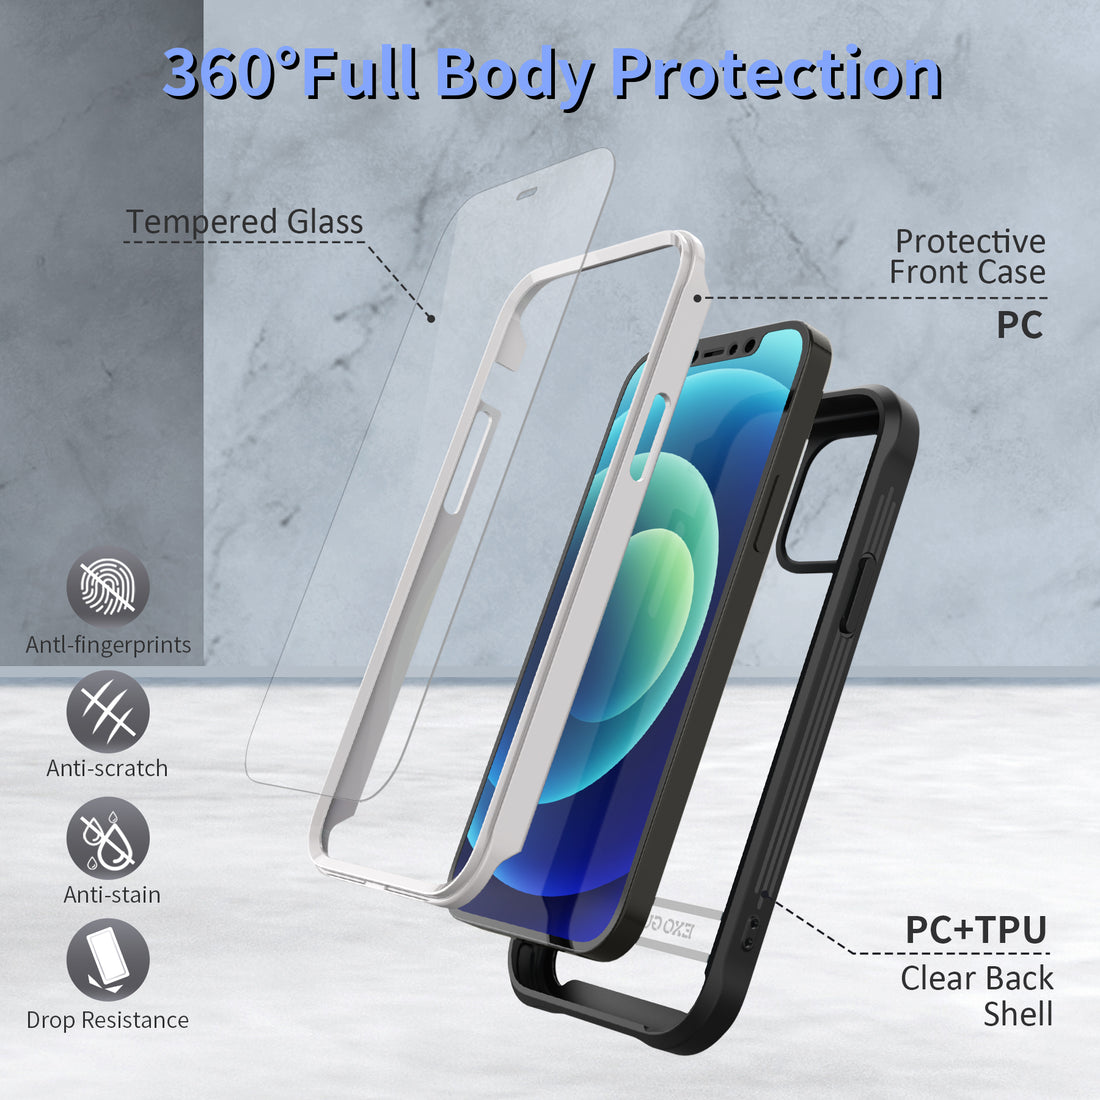 ExoGuard for iPhone 12 Series Case, Rubber Shockproof Full-Body Cover